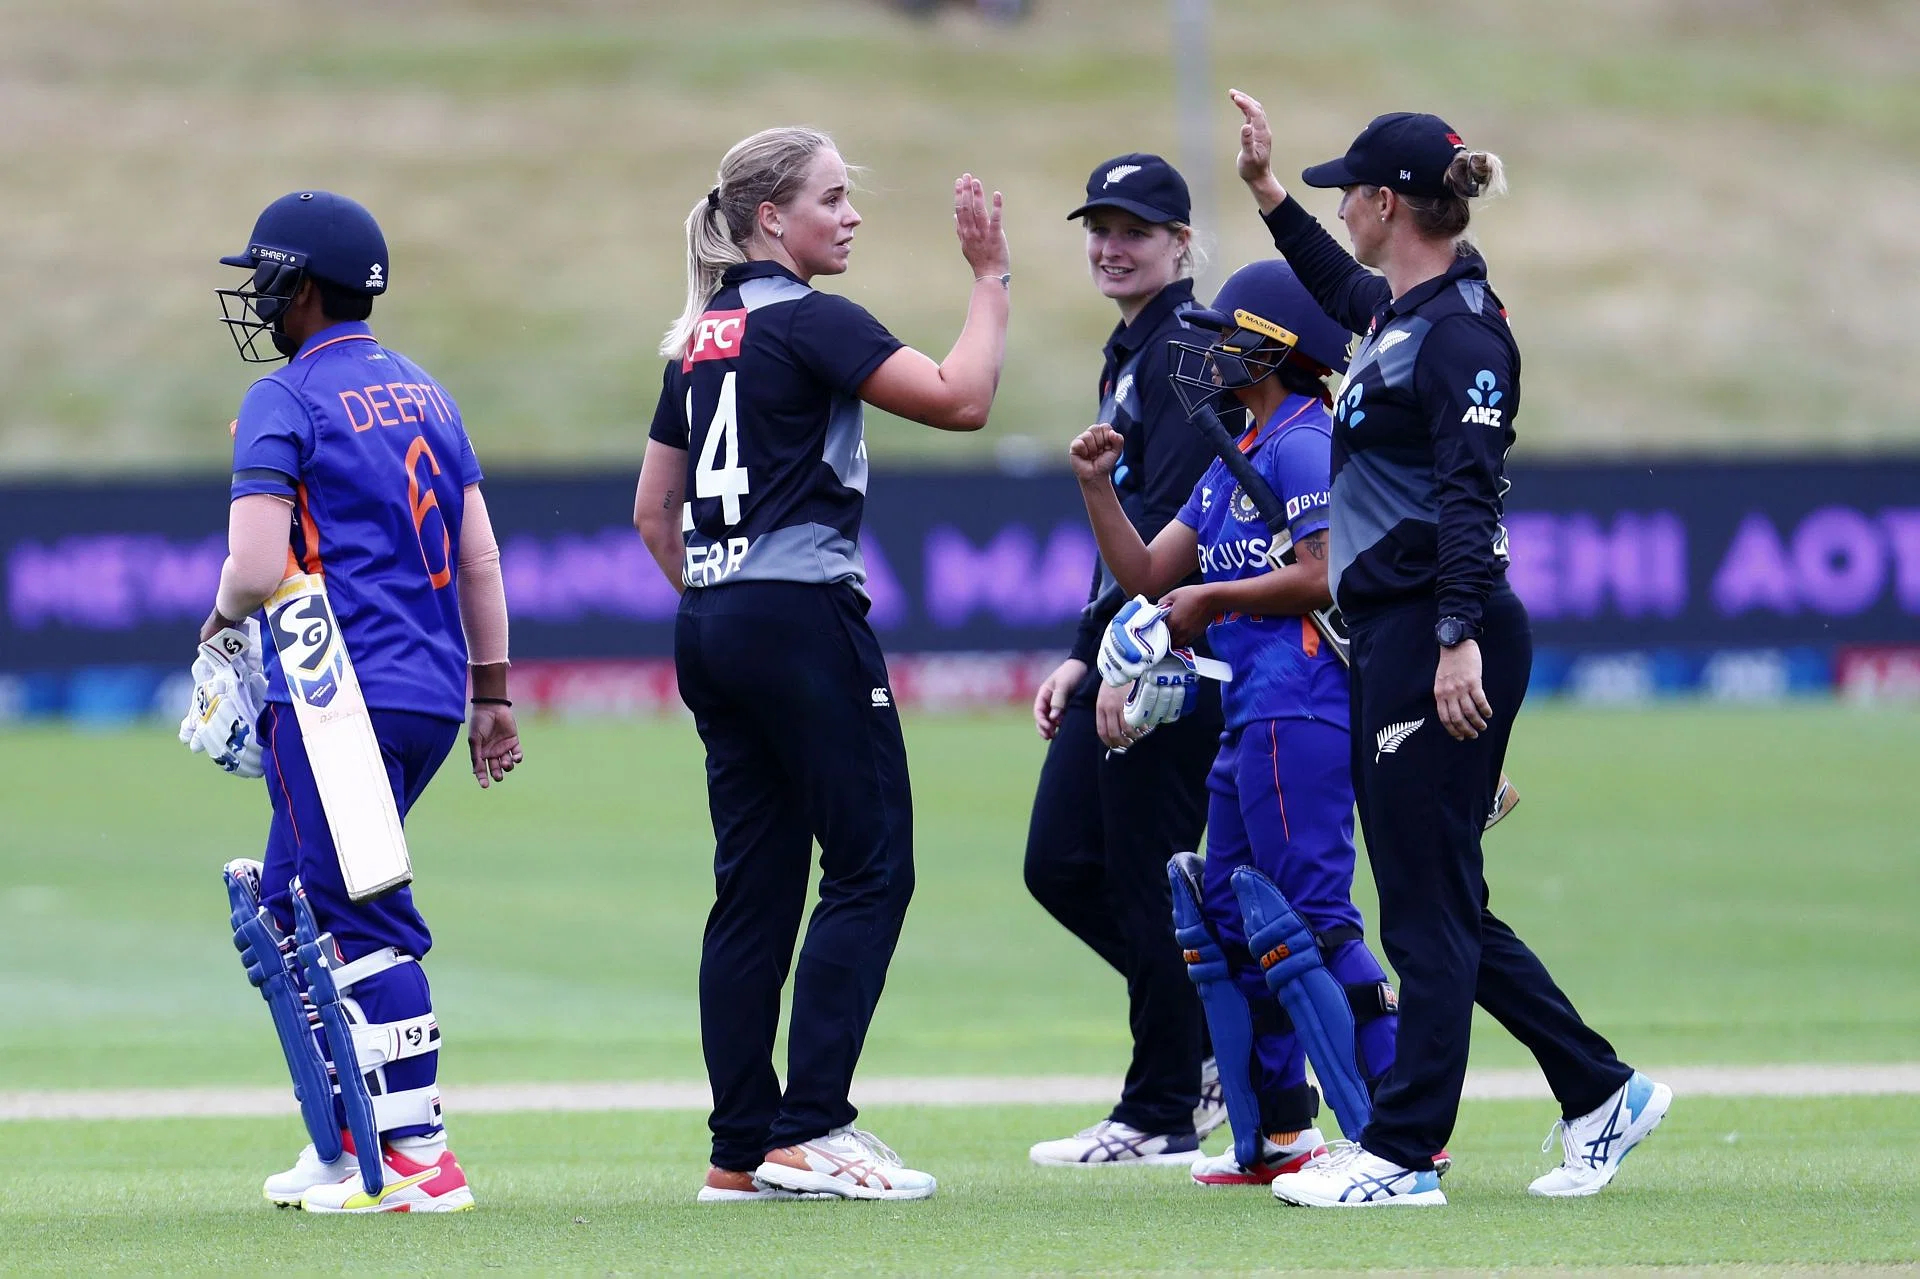 NZW vs INDW 5th ODI Dream11 prediction: New Zealand women vs India women Dream11 Team Picks, Probable Playing 11, Pitch Report And Match Overview, NZ W vs IND W LIVE at 3:30 AM IST Thursday on Insidesport